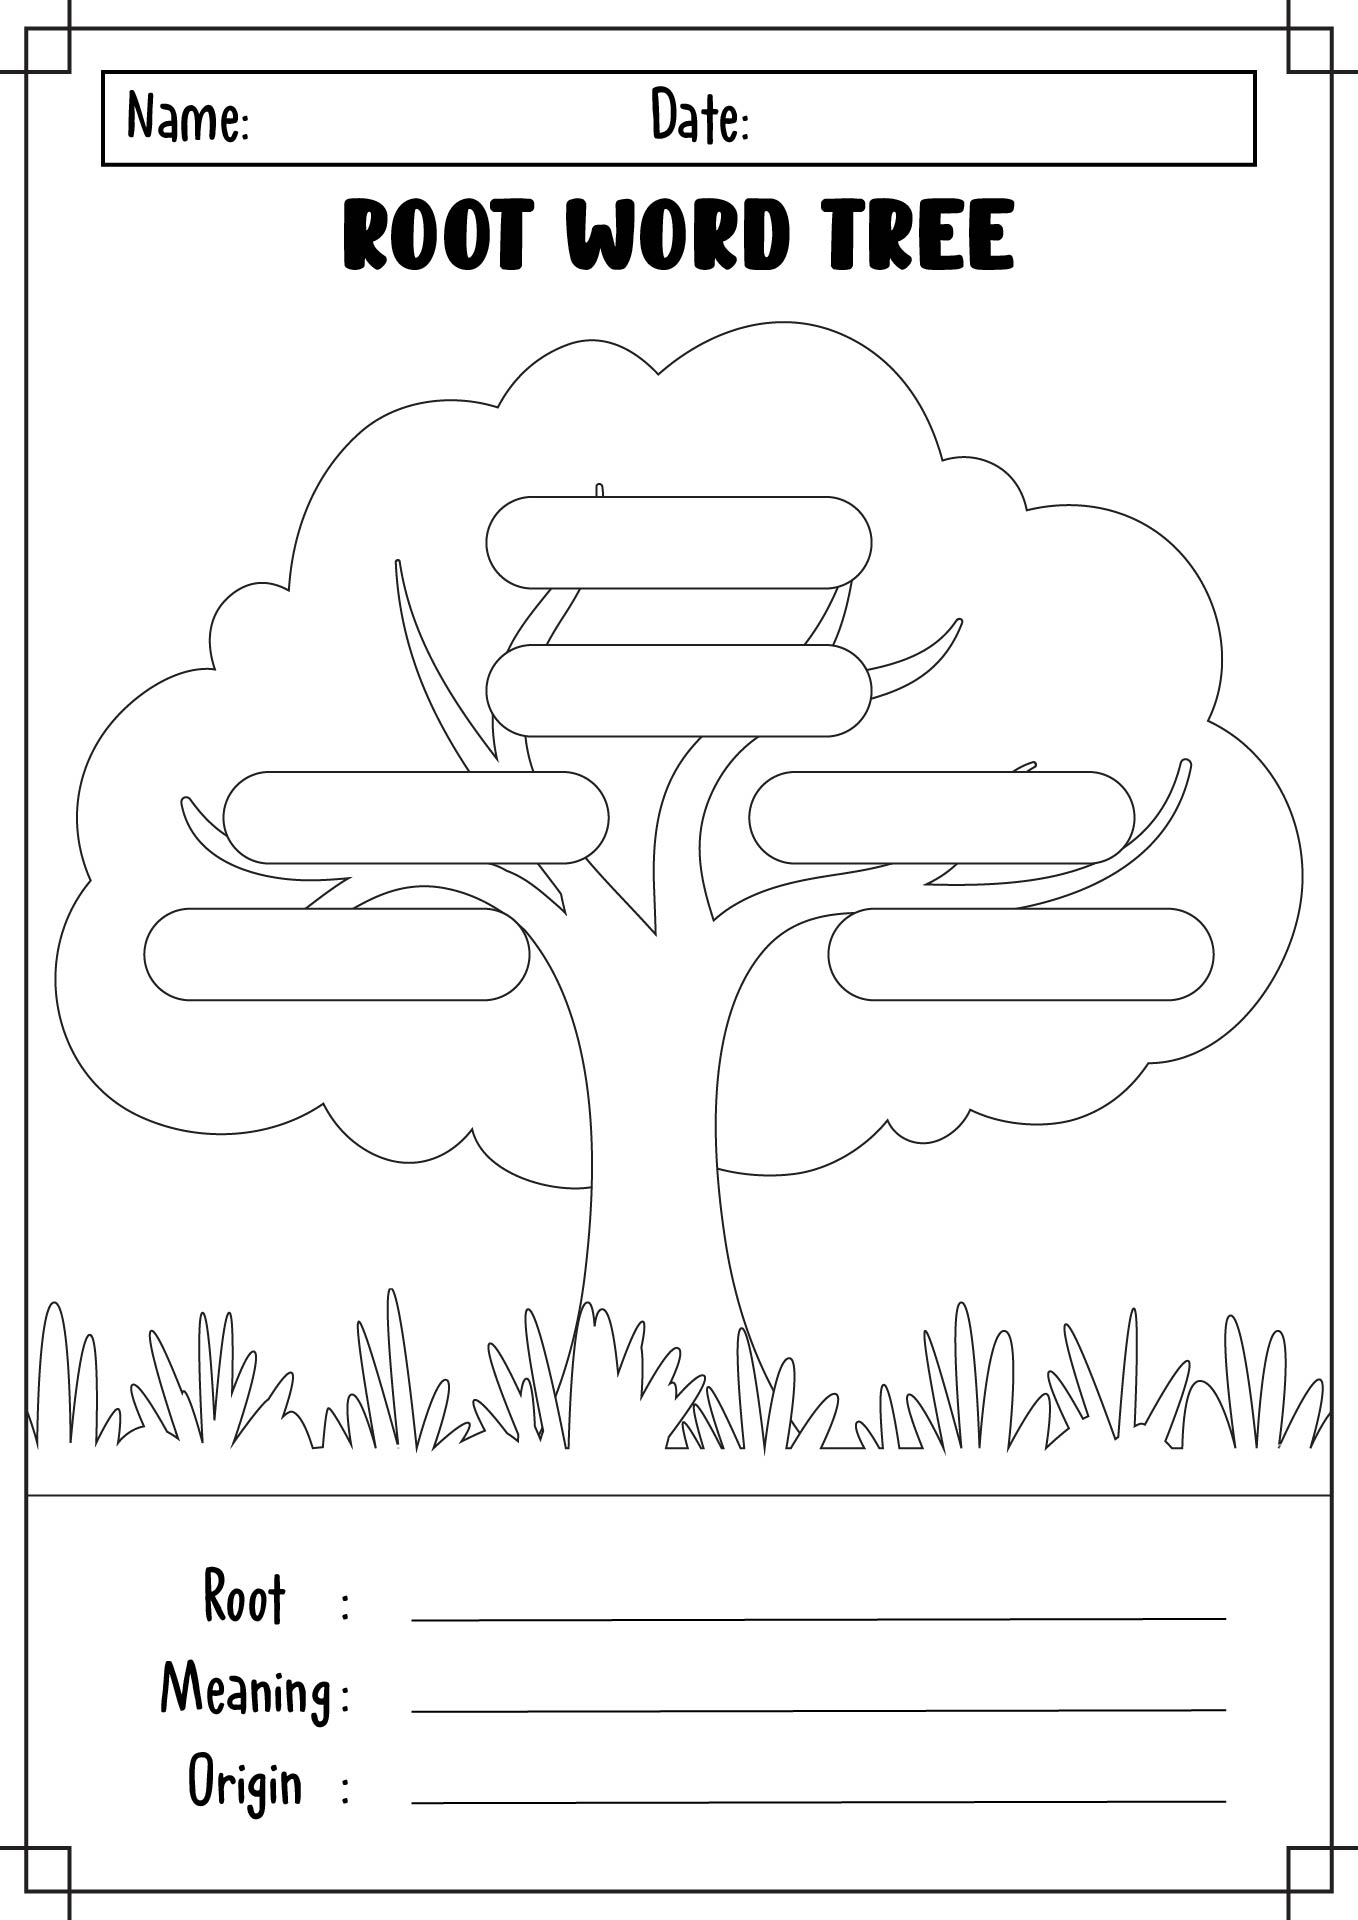 Greek and Latin Root Word Tree